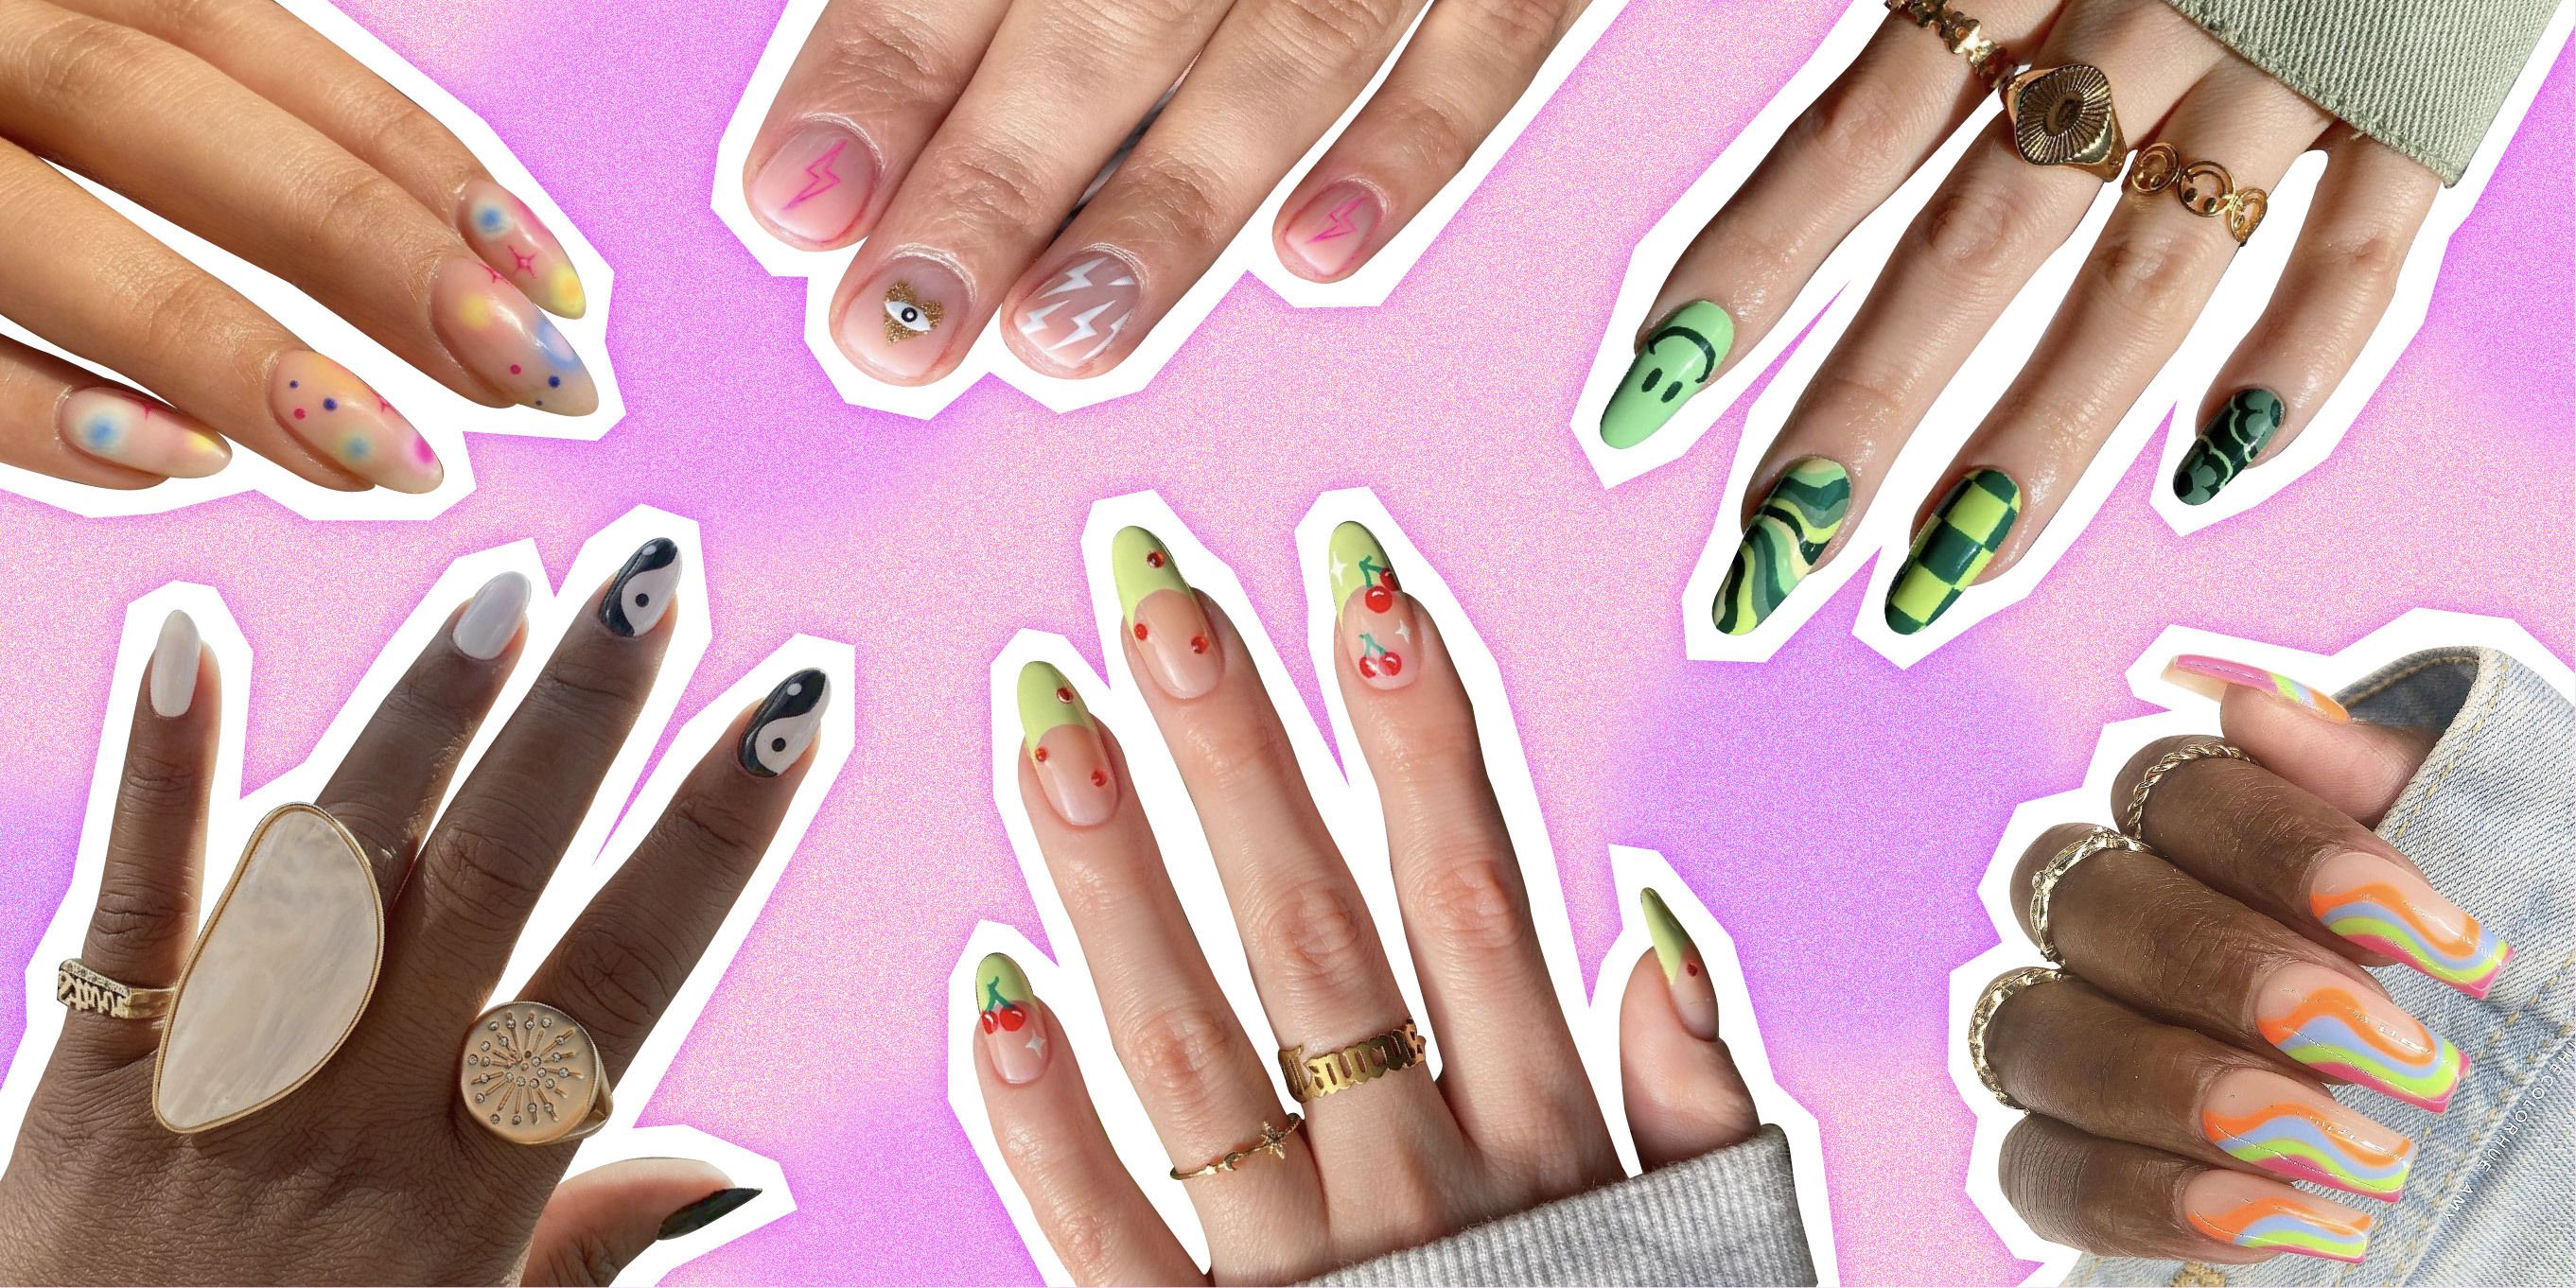 45 Insanely Cute Autumn Nail Designs You Have to Recreate This Autumn  Season - With Houna